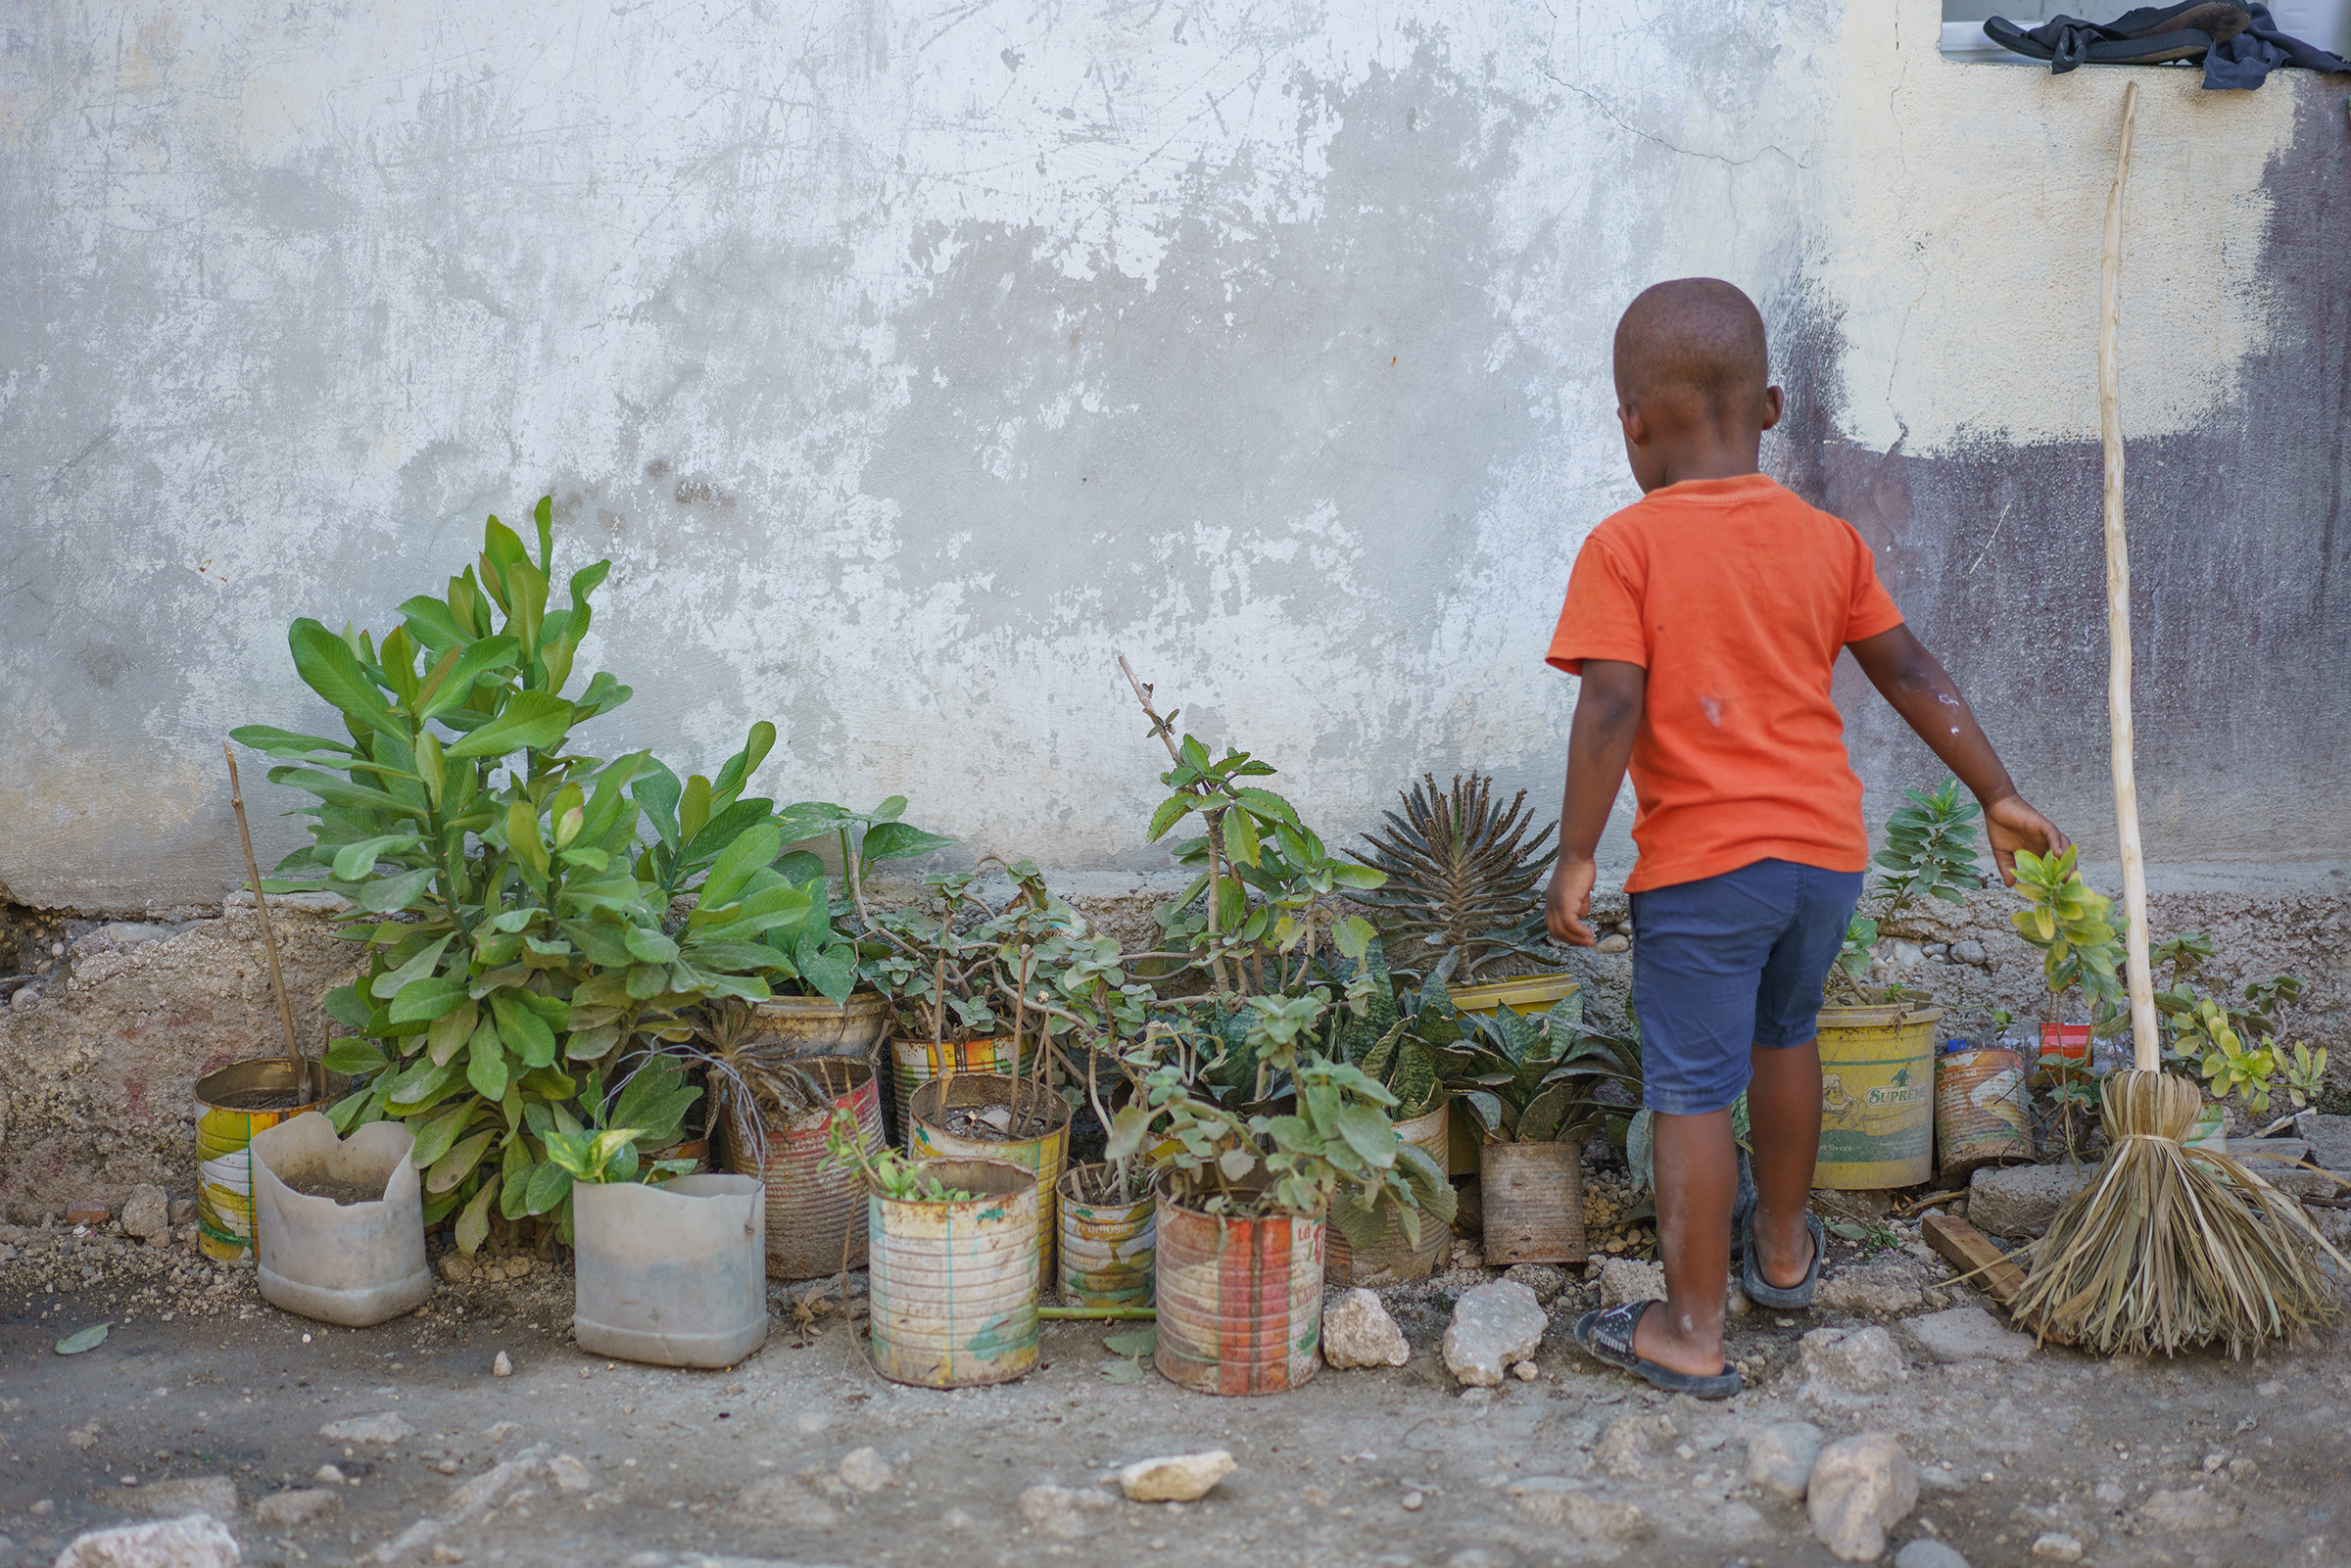 Joseph's son, 3 year-old Prince Honey Joseph, plays at his home in Port-au-Prince in late December.